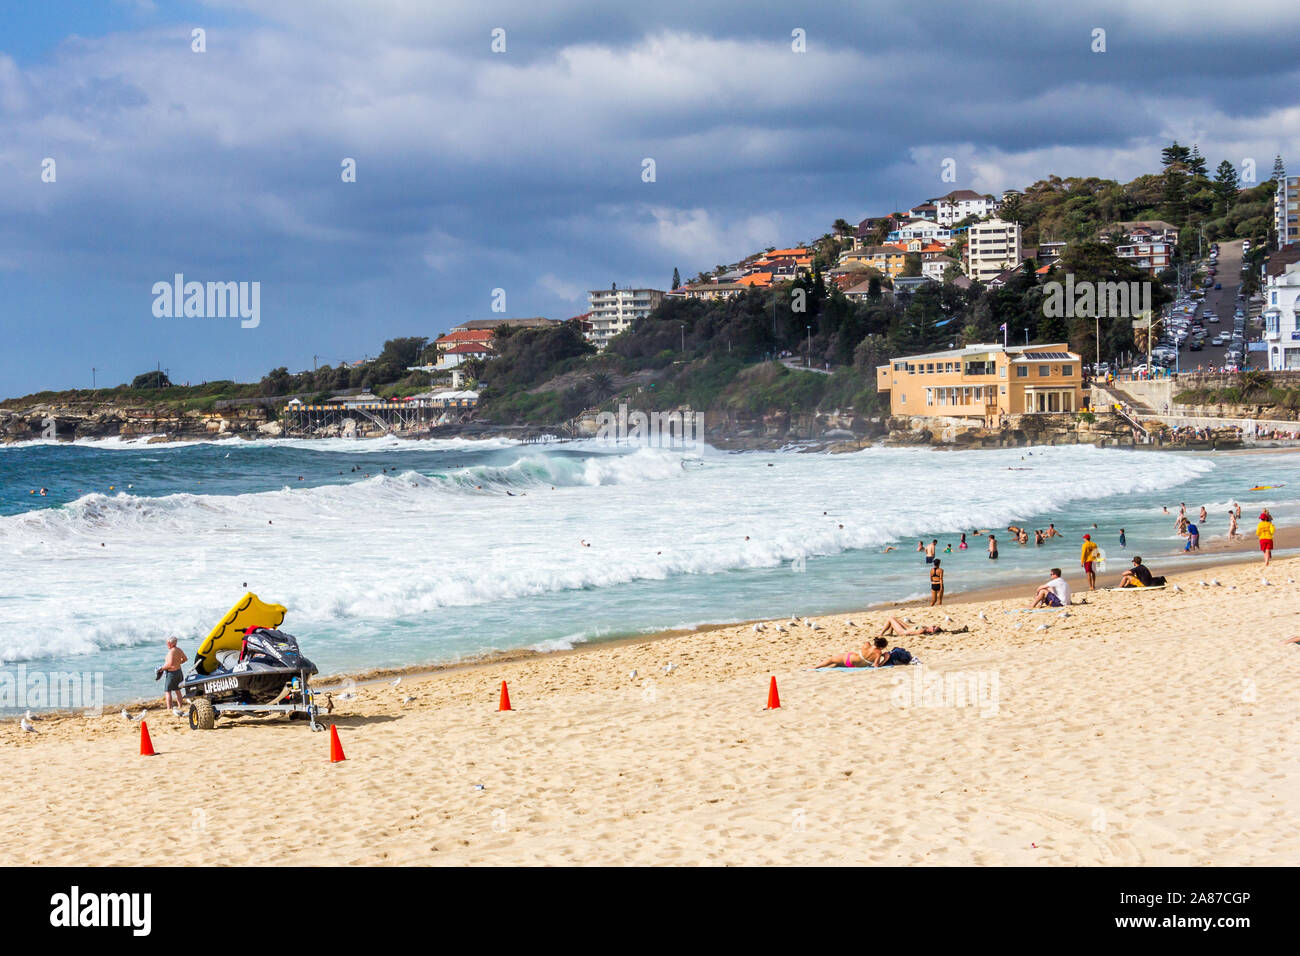 Coogee Beach, Australia - March 16th 2013: Waves on the beach on a stormy day. This is one of Sydneys most popular beaches. Stock Photo